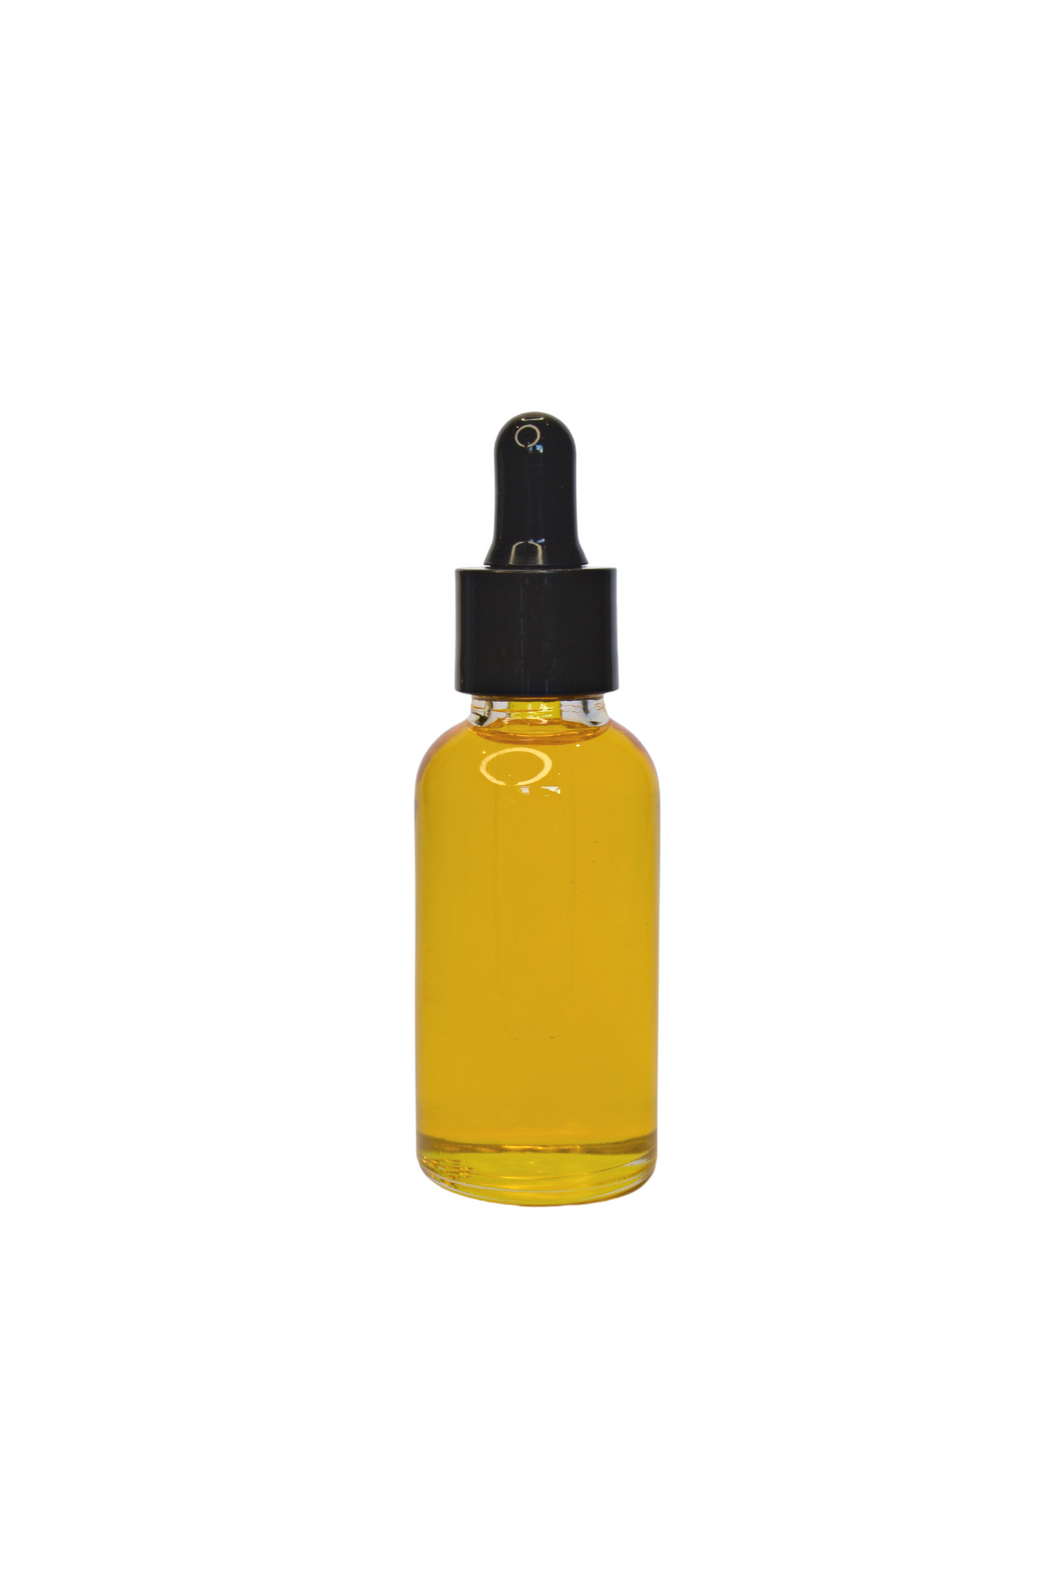 Turmeric and carrot facial oil for brightening skin - suitable for all skin types